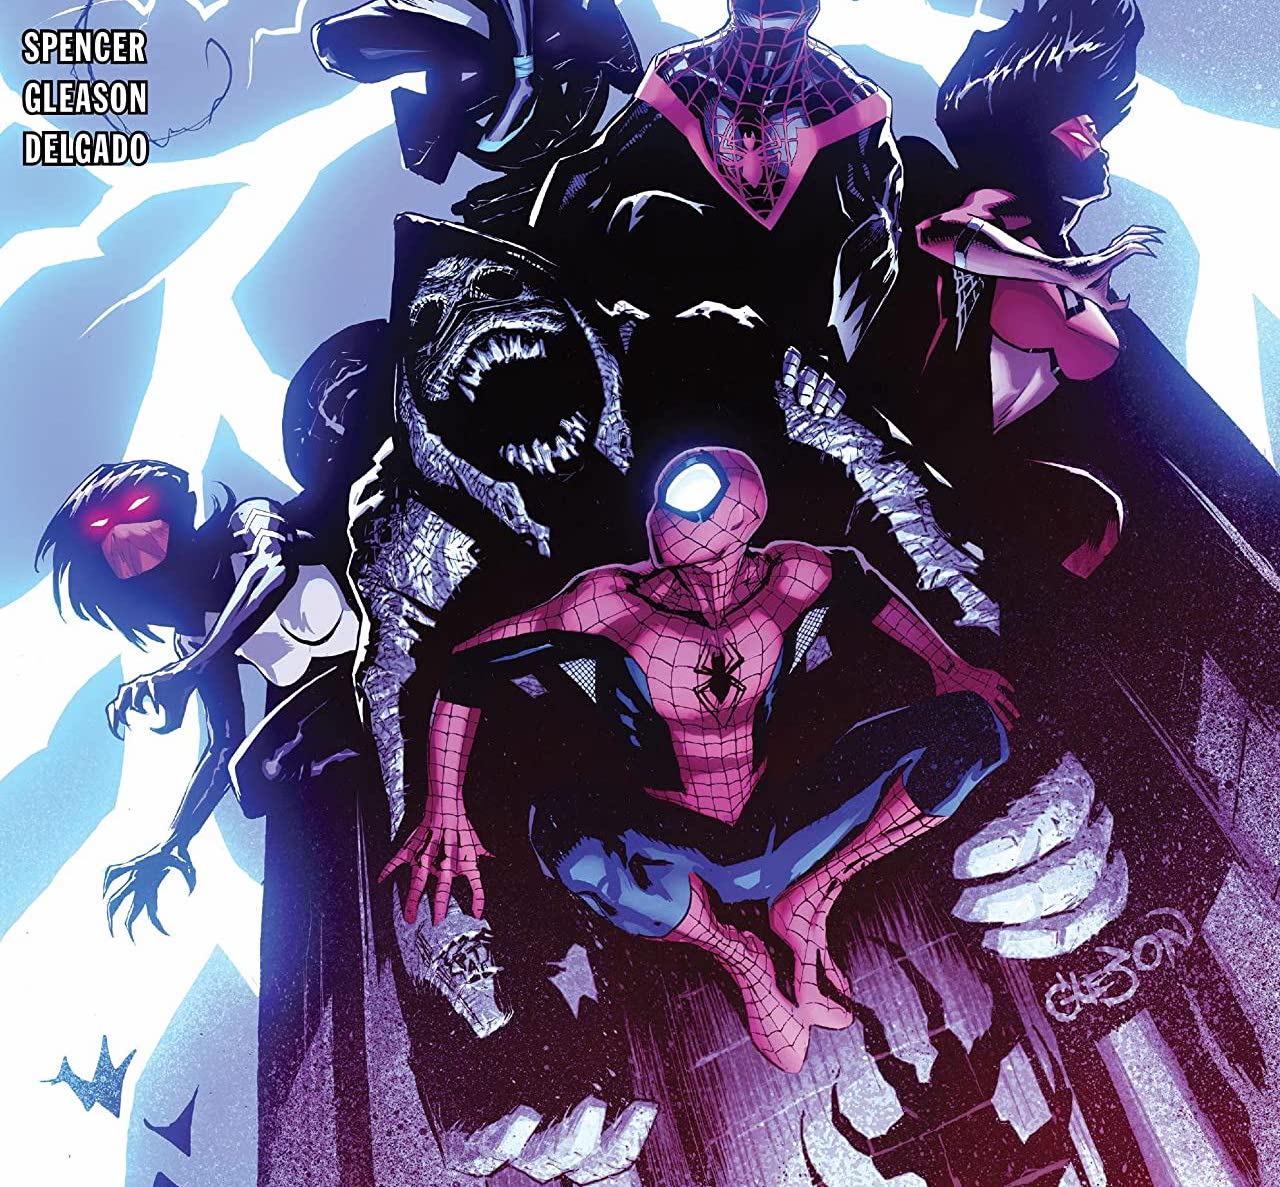 'Amazing Spider-Man' Vol. 11 is a bold attempt that fails to find its purpose